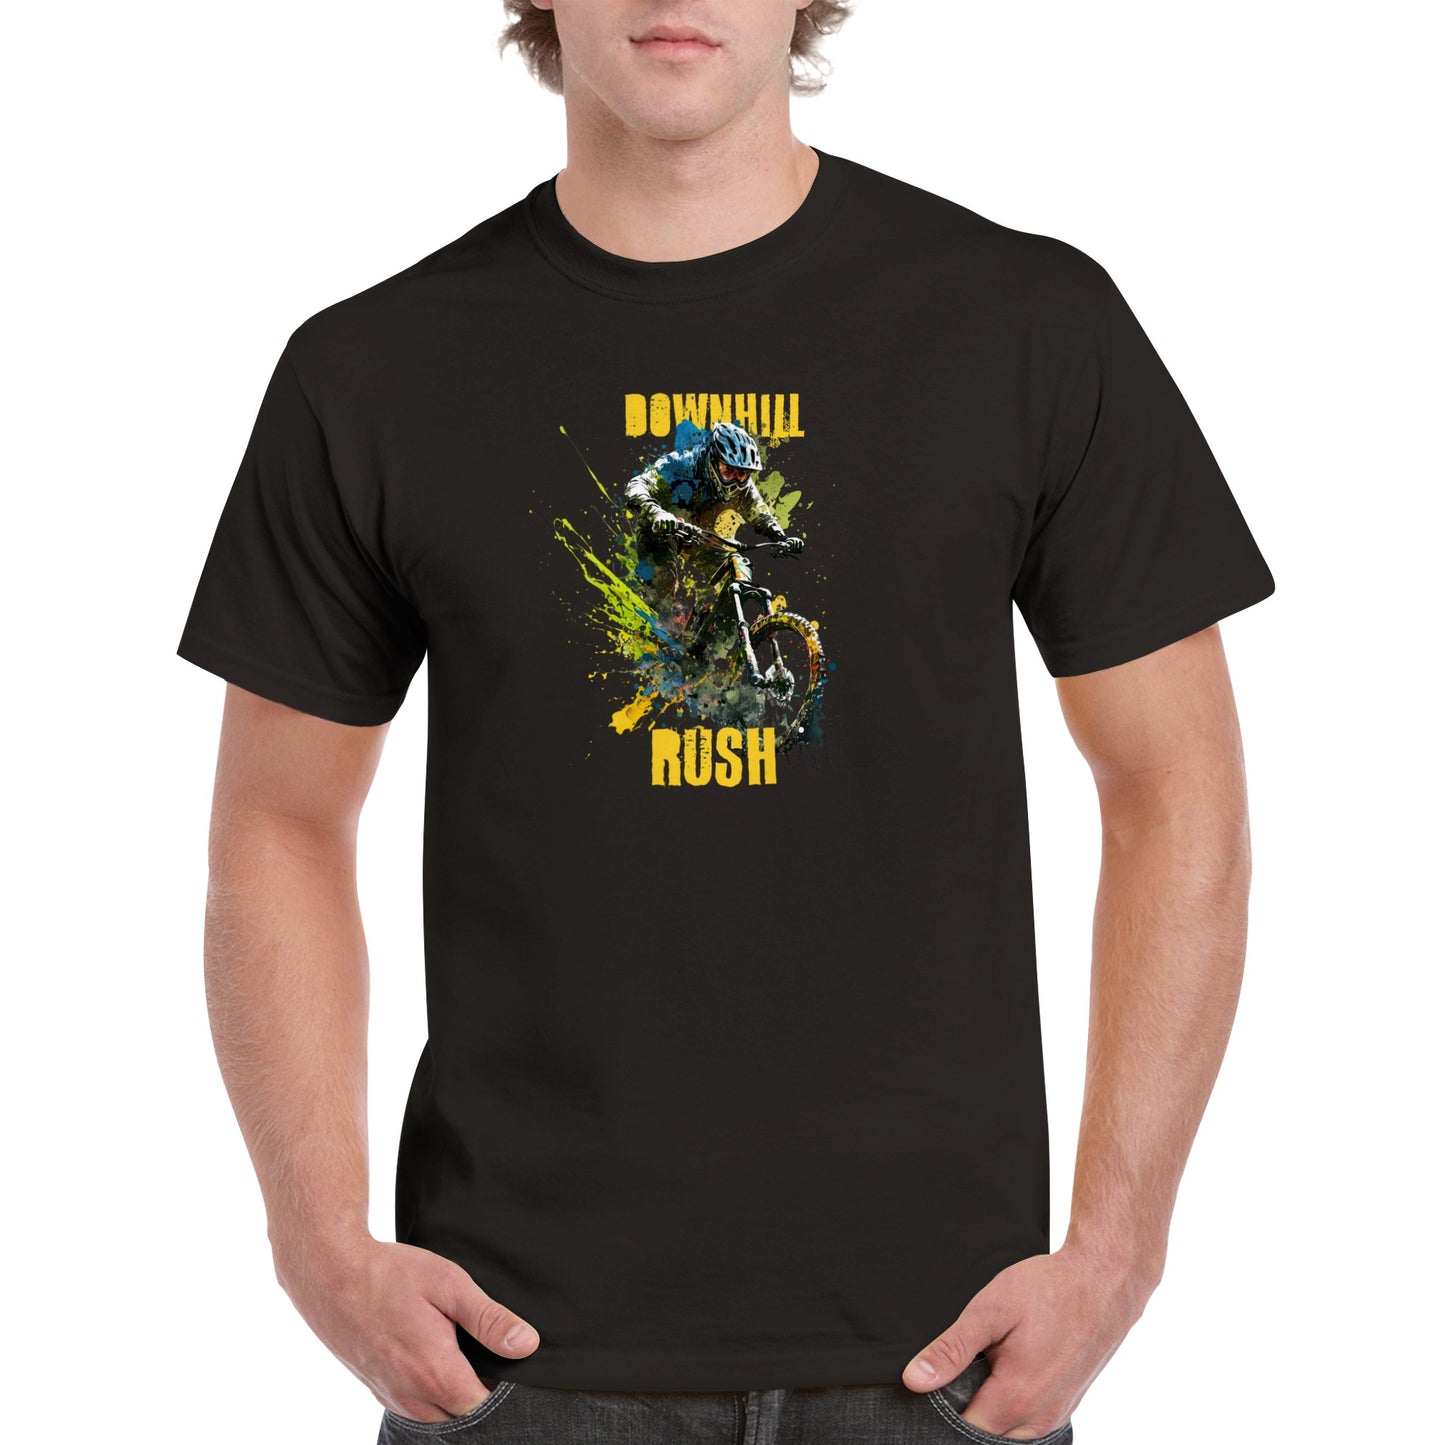 Guy wearing a black t-shirt with a downhill mountain biker print and the caption Downhill Rush